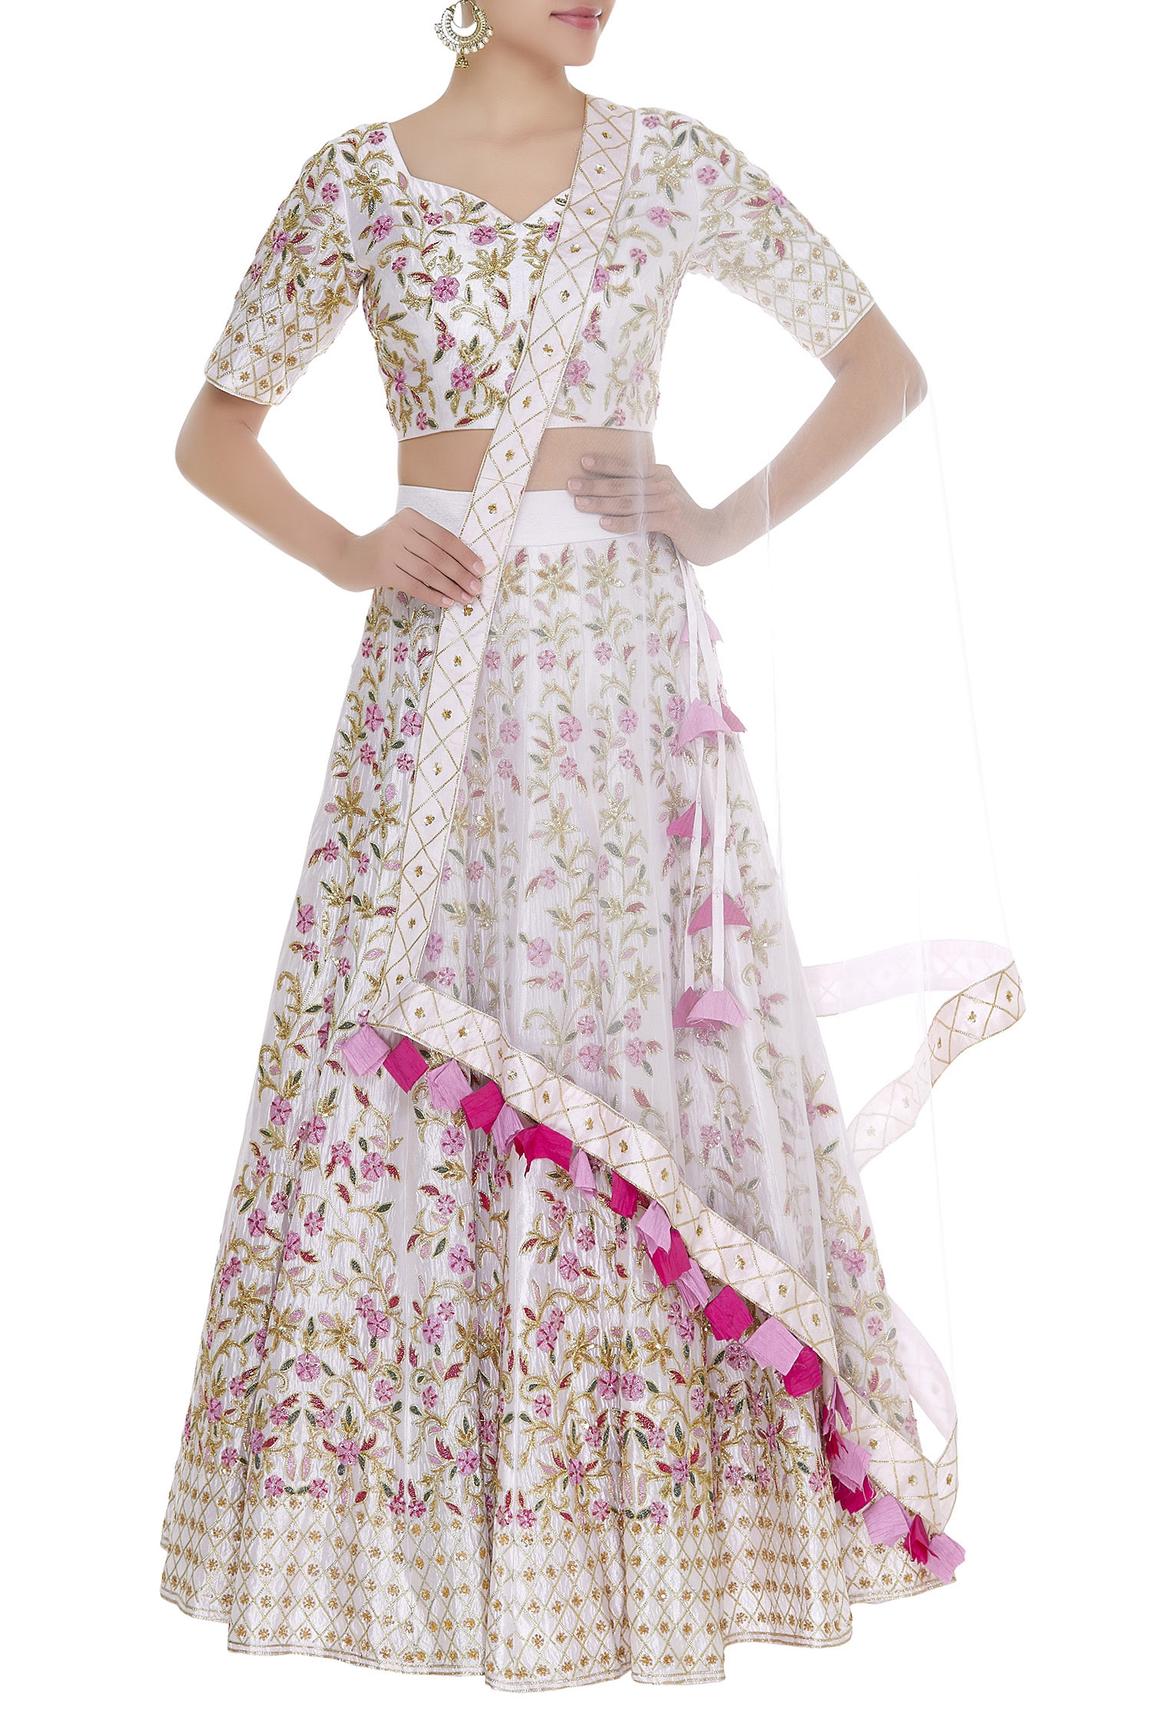 Off White Embroidered Lehenga With Blouse And Dupatta